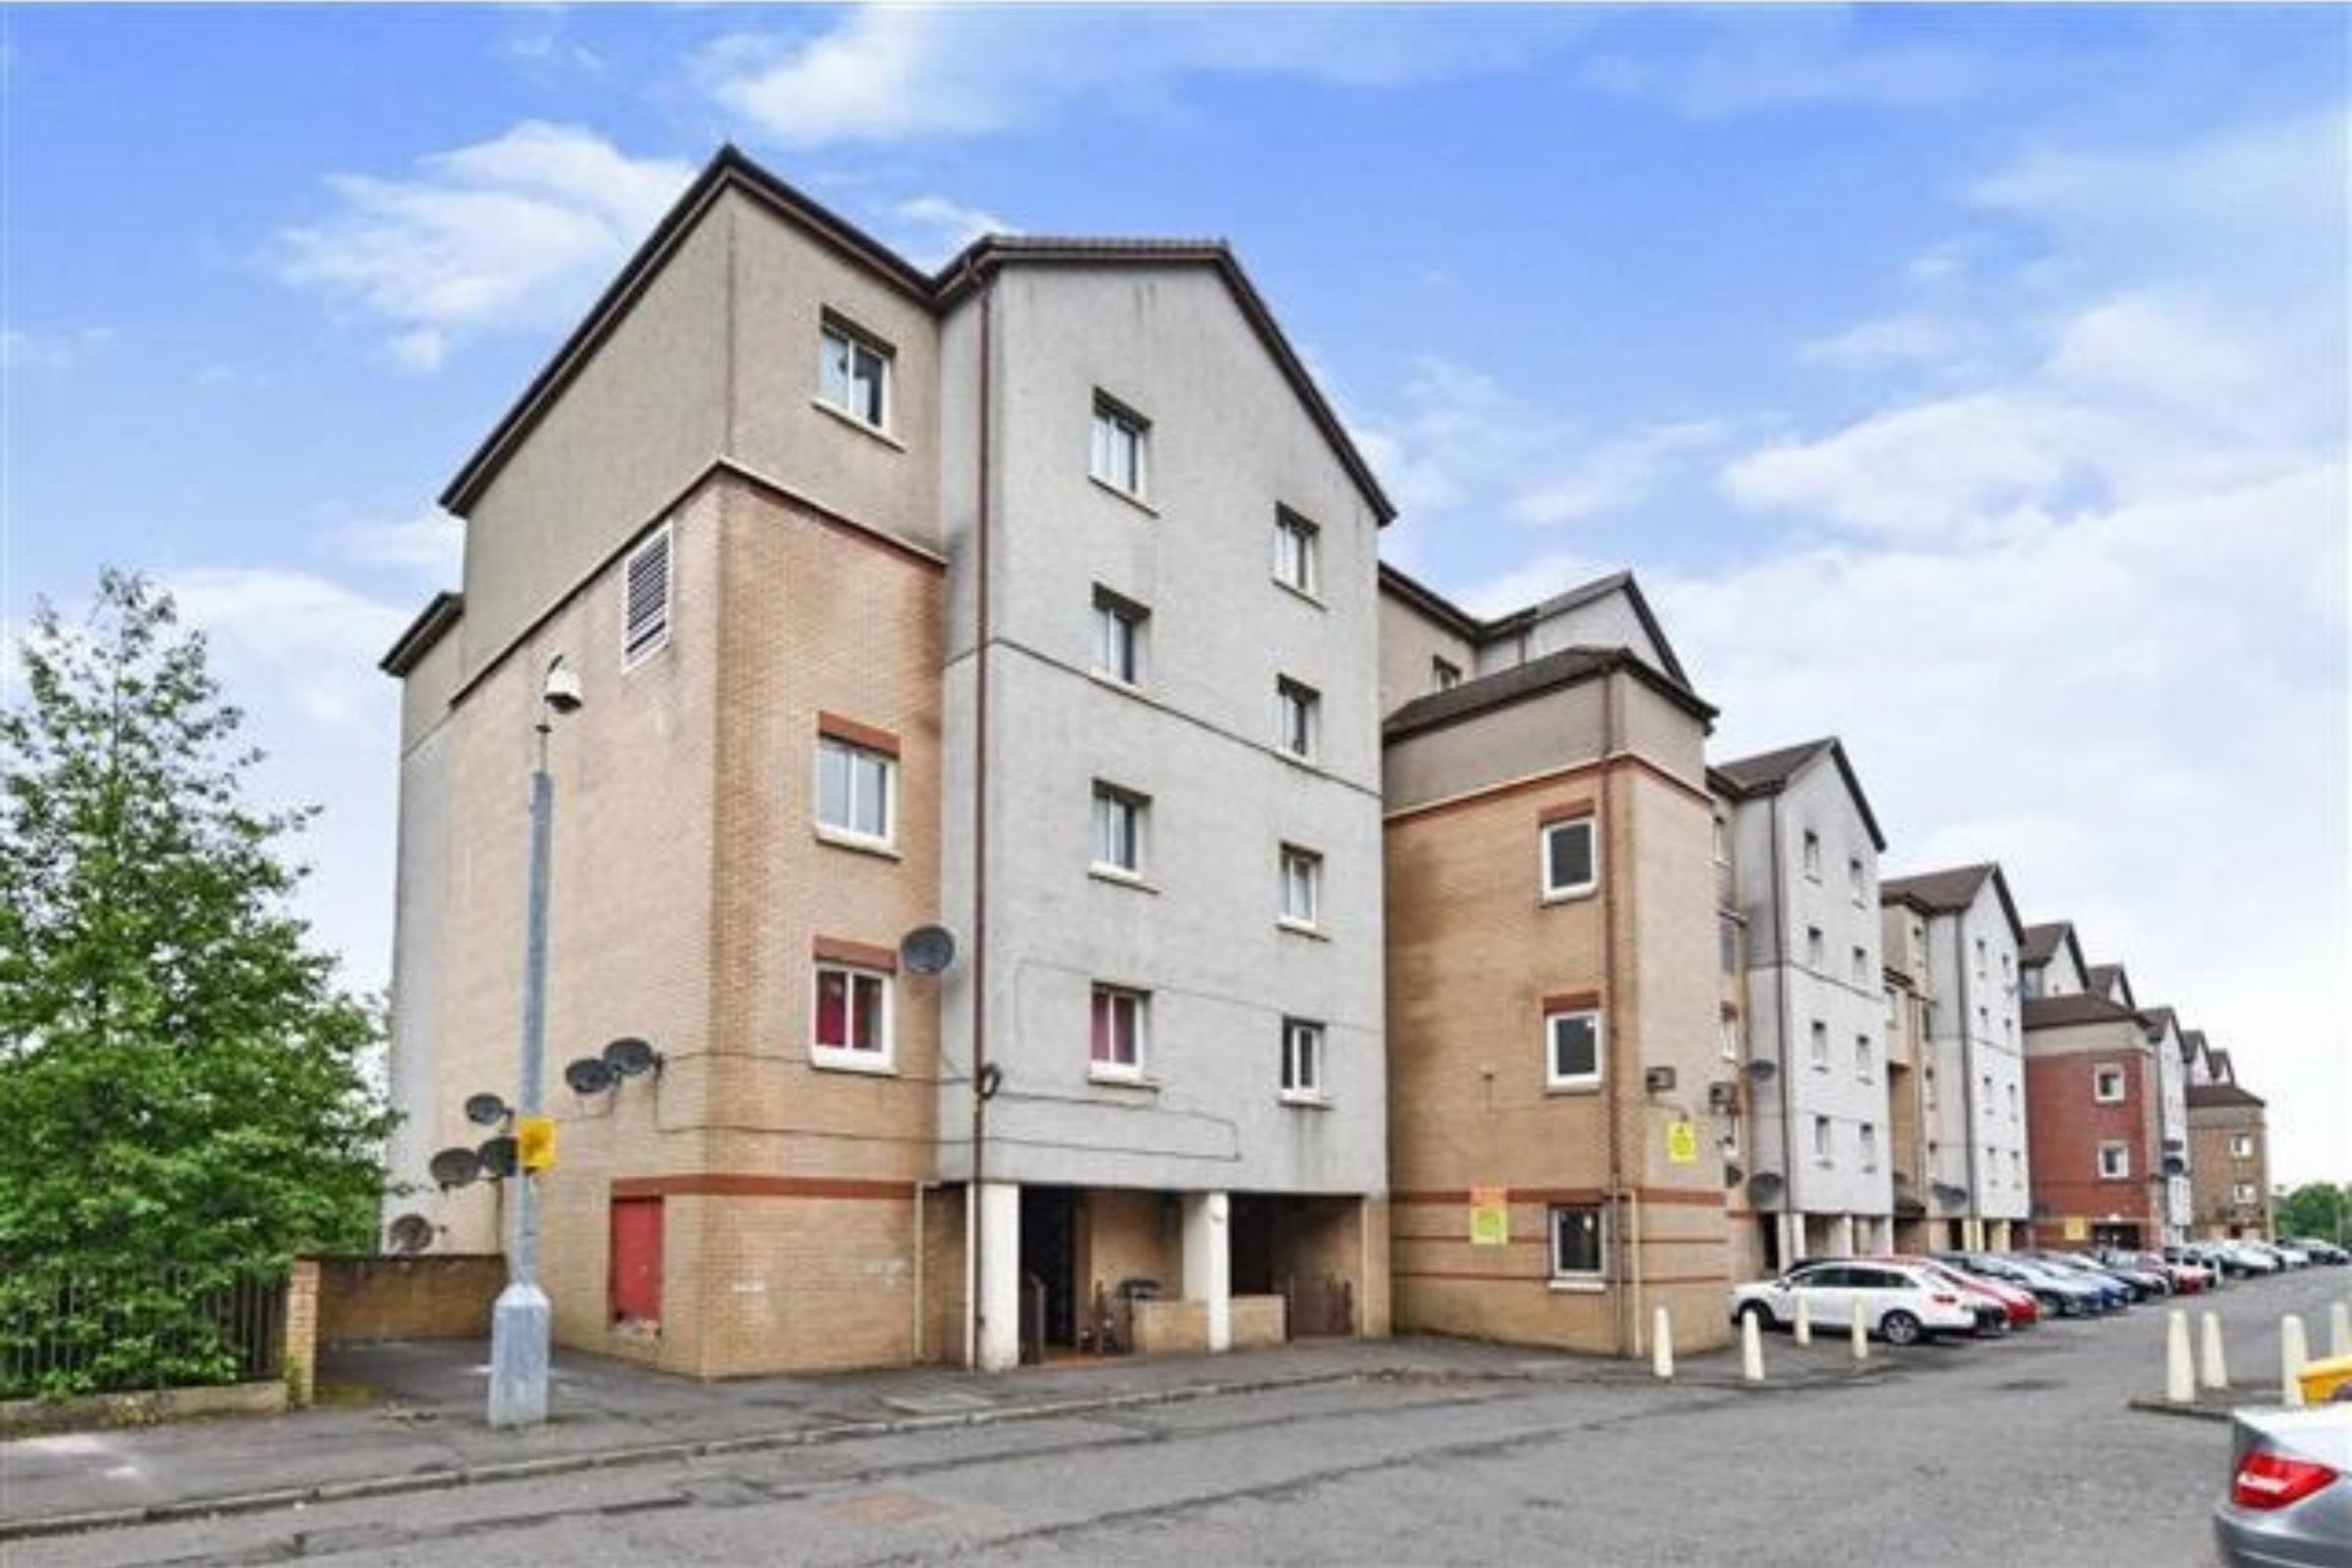 Glasgow flats for sale: One bedroom apartment available in Springburn